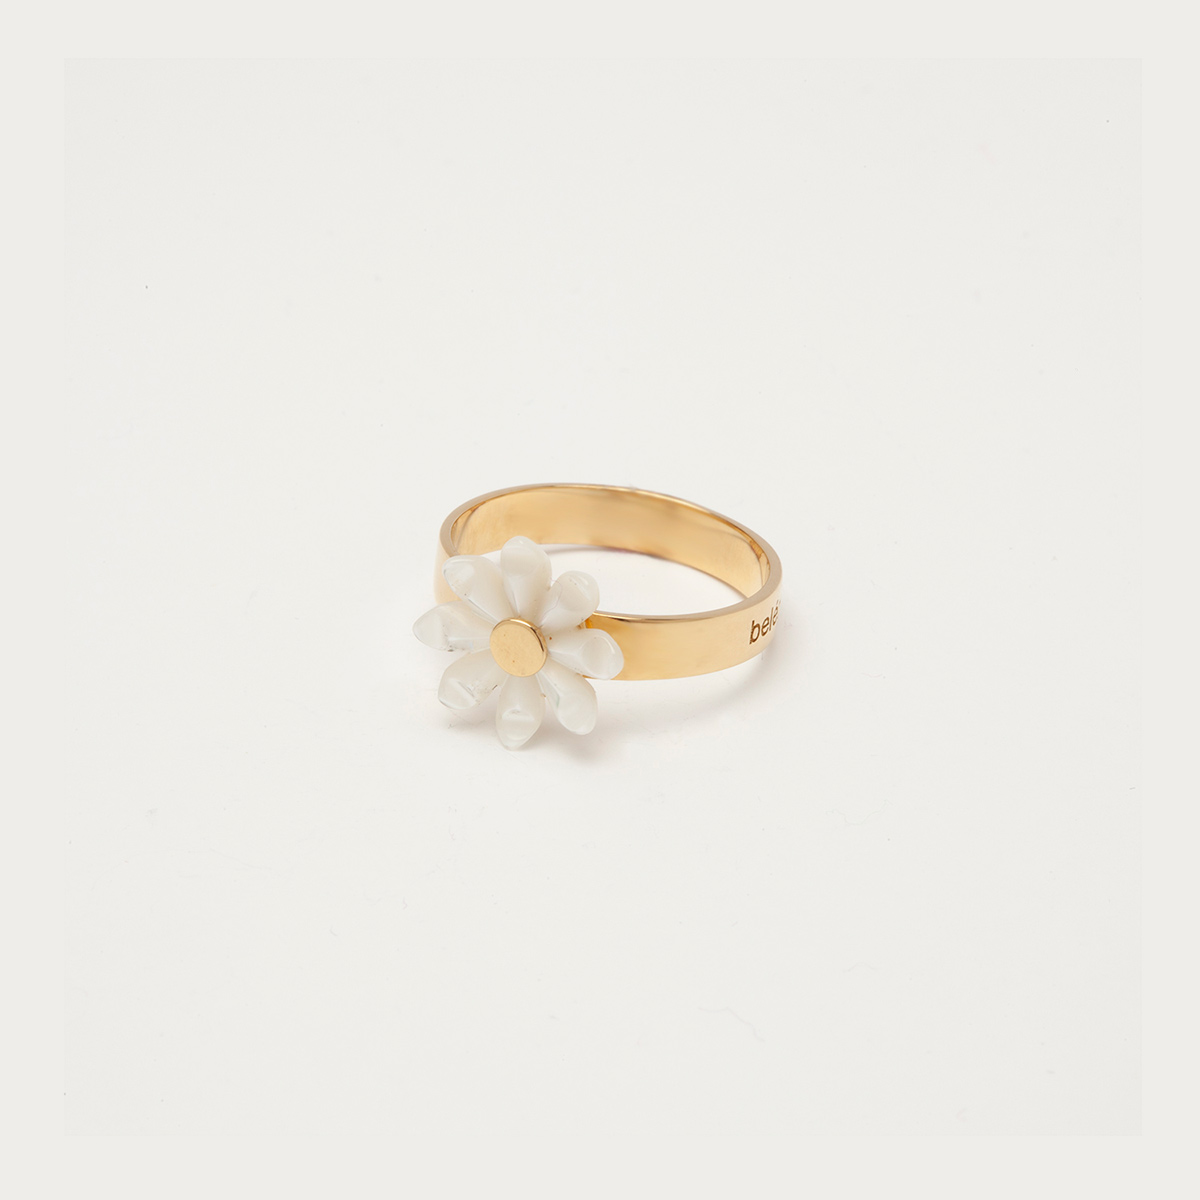 Zira handmade ring in 9k or 18k gold and mother-of-pearl 1 designed by Belen Bajo